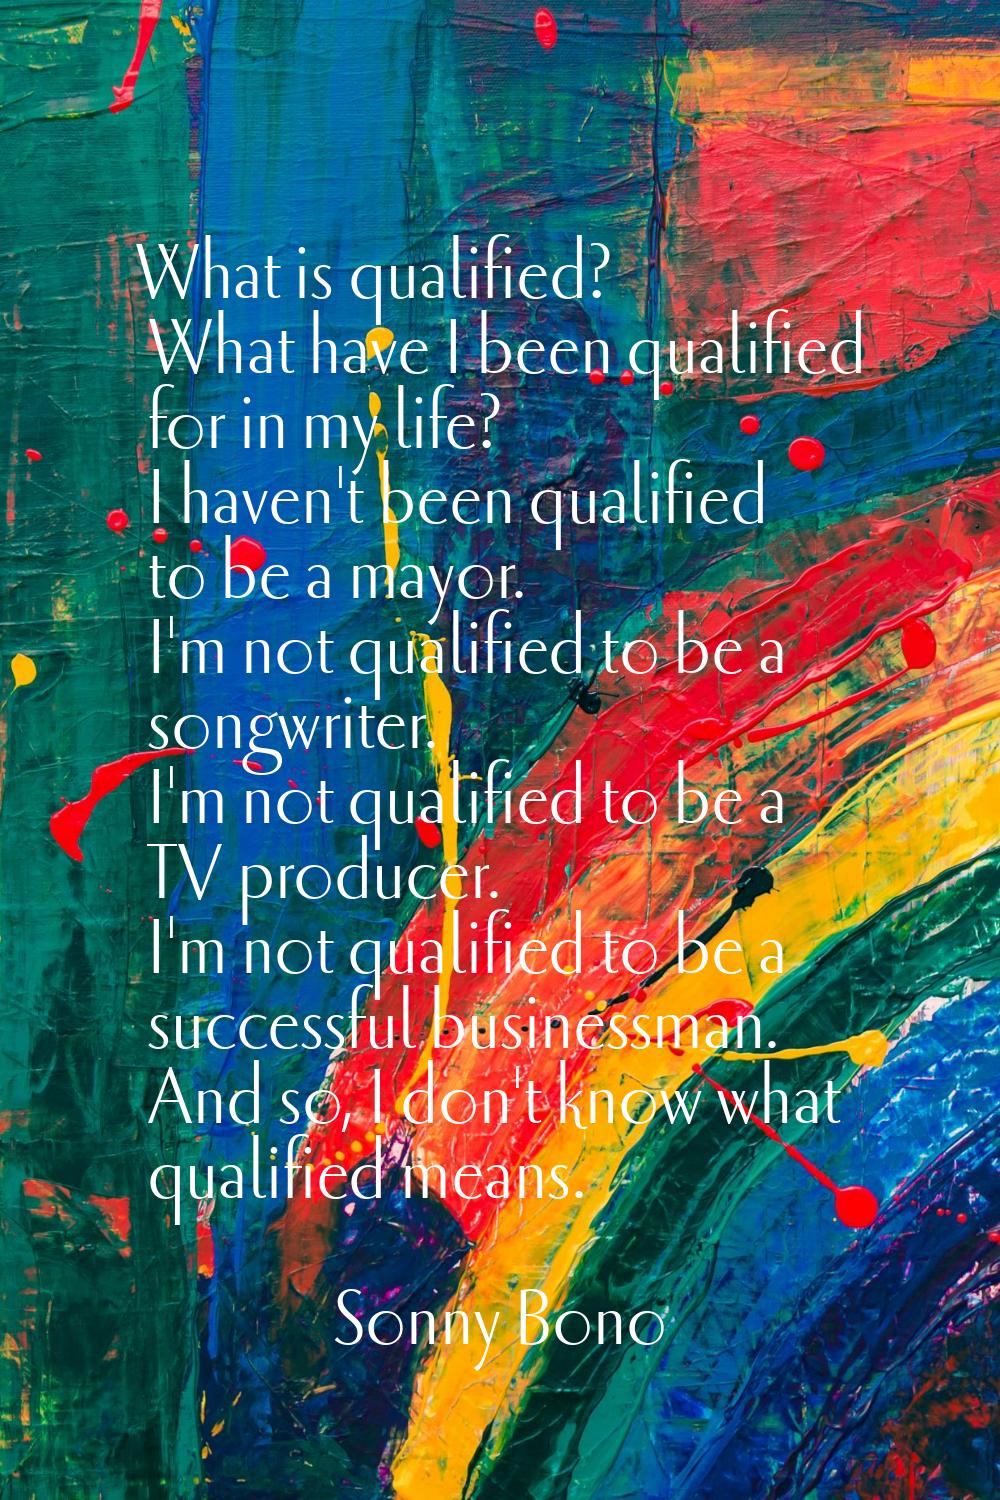 What is qualified? What have I been qualified for in my life? I haven't been qualified to be a mayo